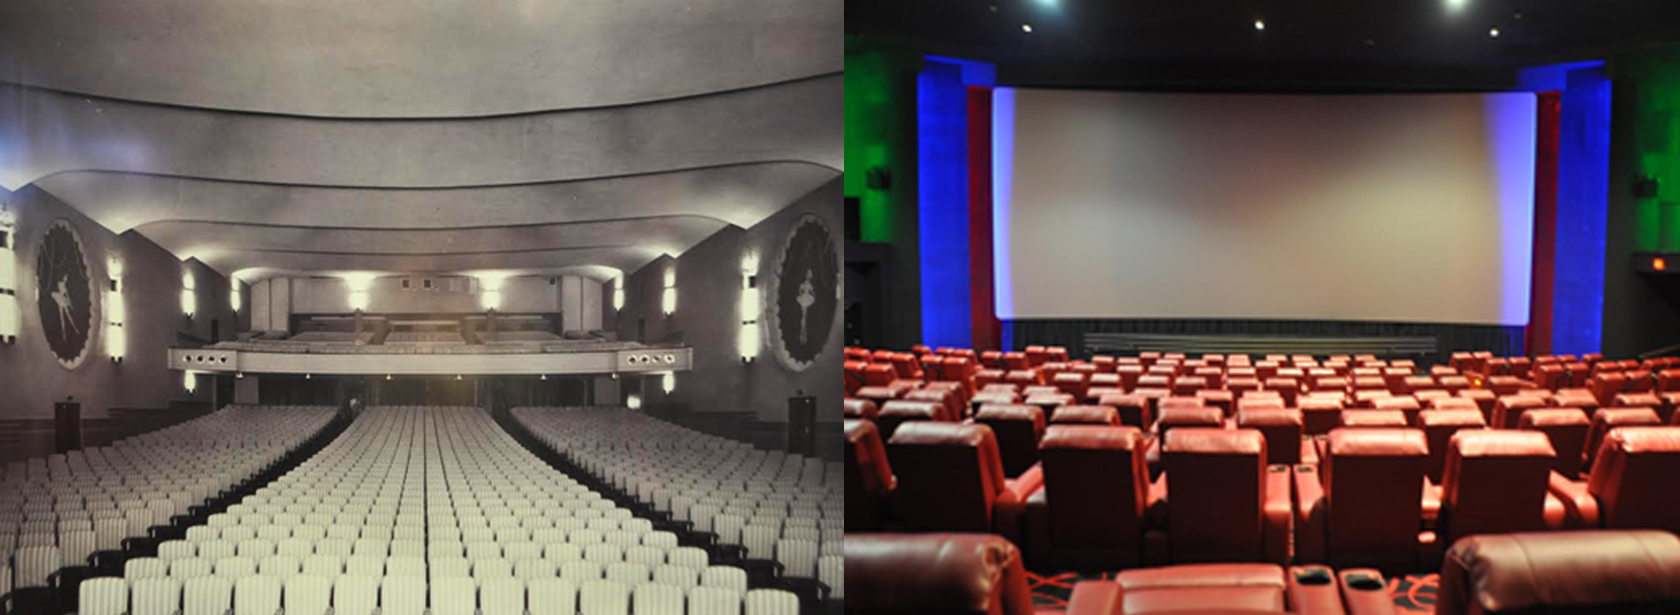  Before and after photos highlight the renovations made to the movie theater. Maysa Daoud / Contributor